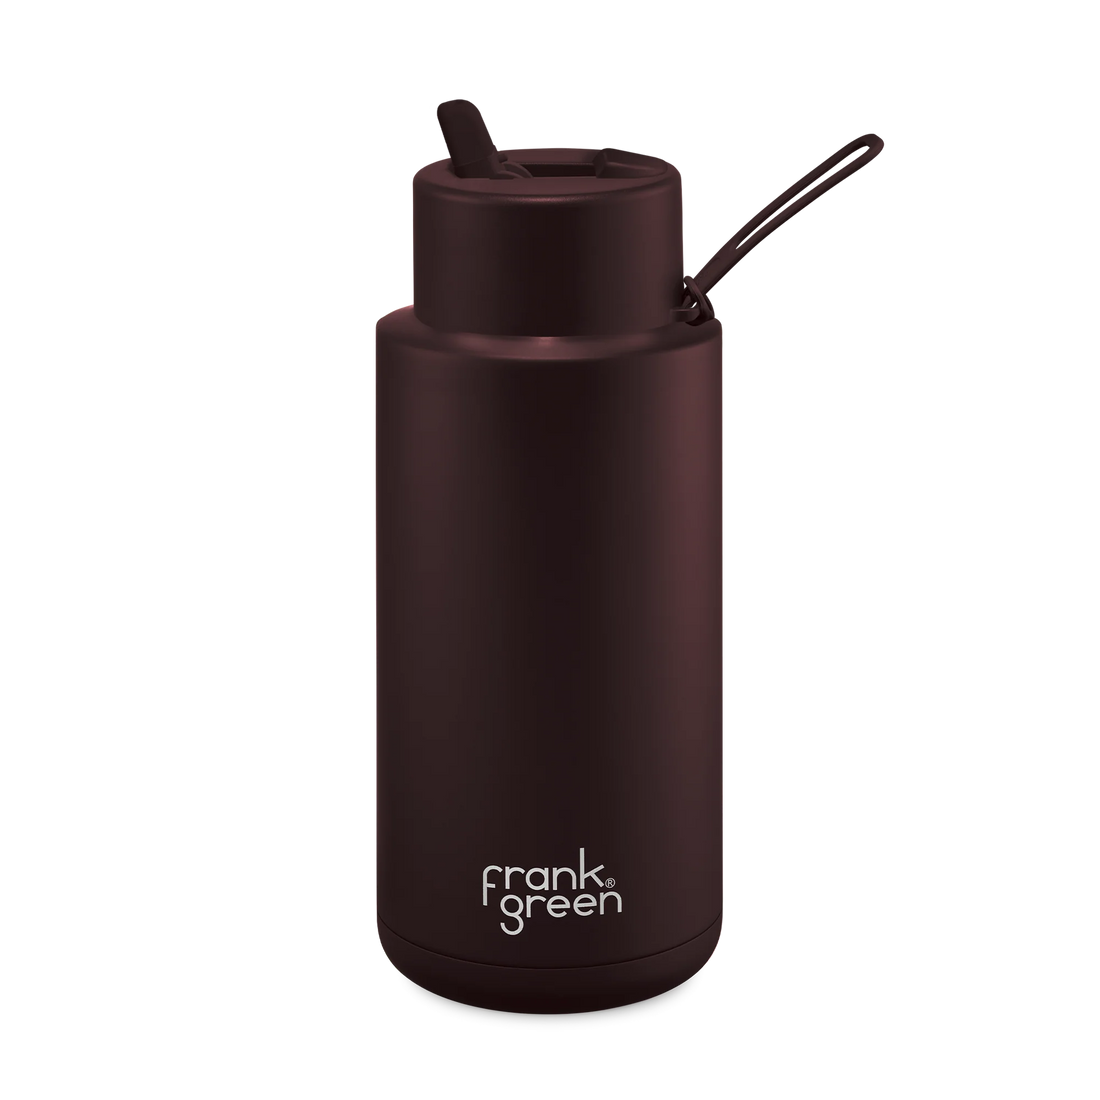 Frank Green Stainless Steel Ceramic Reusable Bottle Chocolate With Straw And Strap 34oz/1,000ml